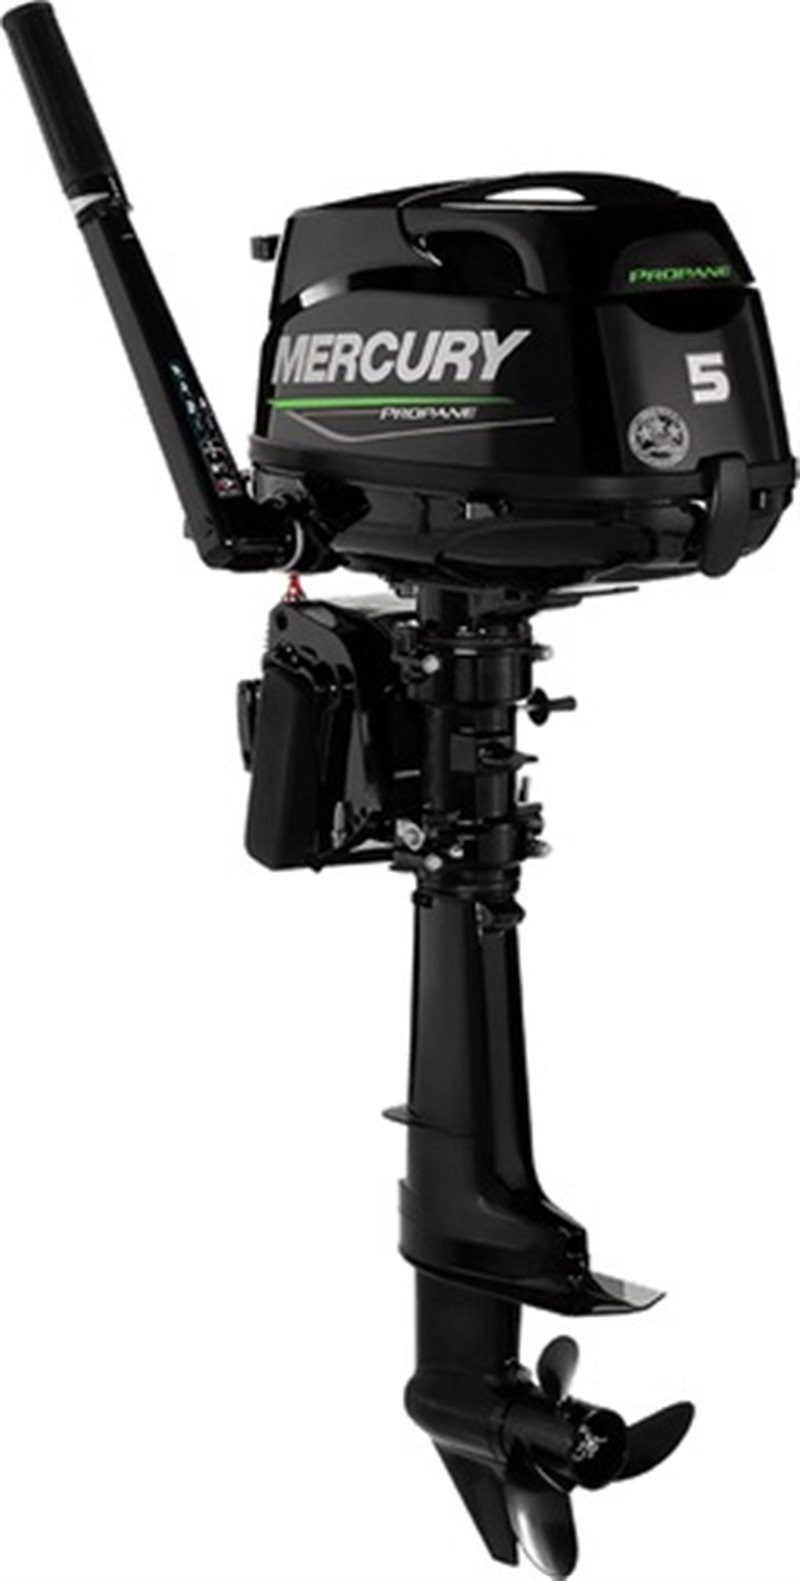 2021 Mercury Outboard FourStroke 4-6 hp 5 Propane at DT Powersports & Marine